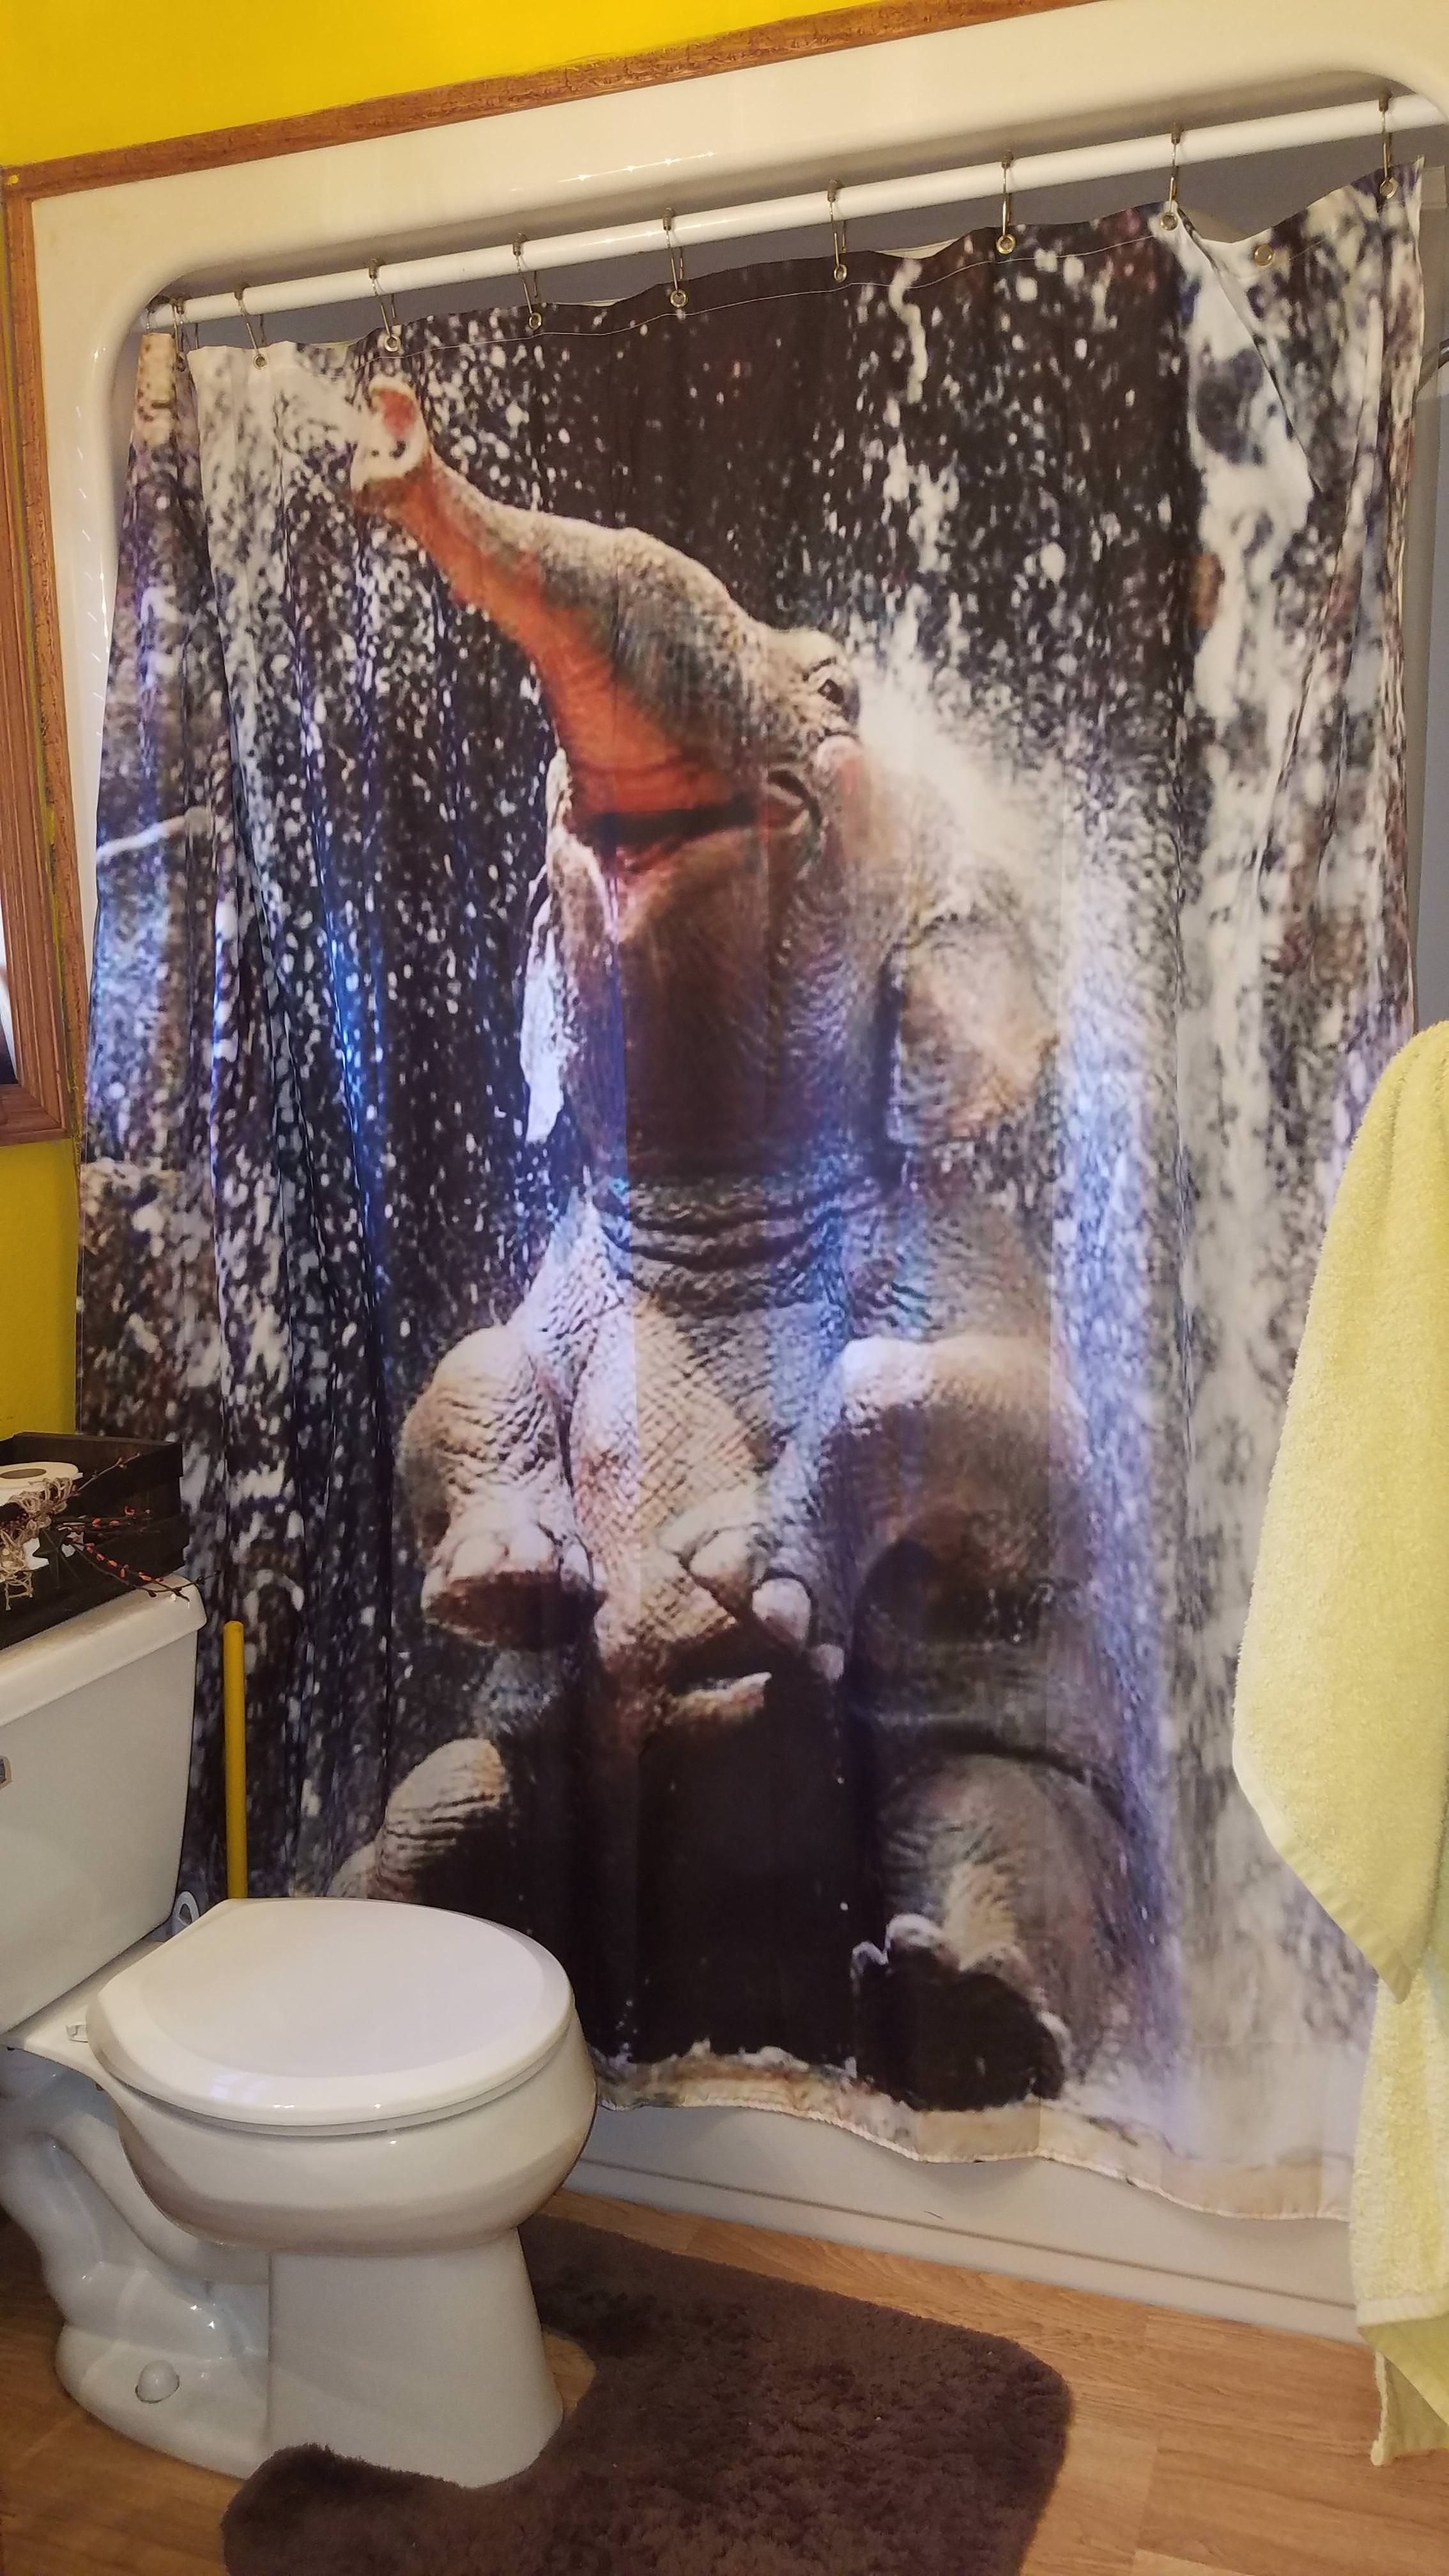 My husband let me choose our shower curtain. I chose this.